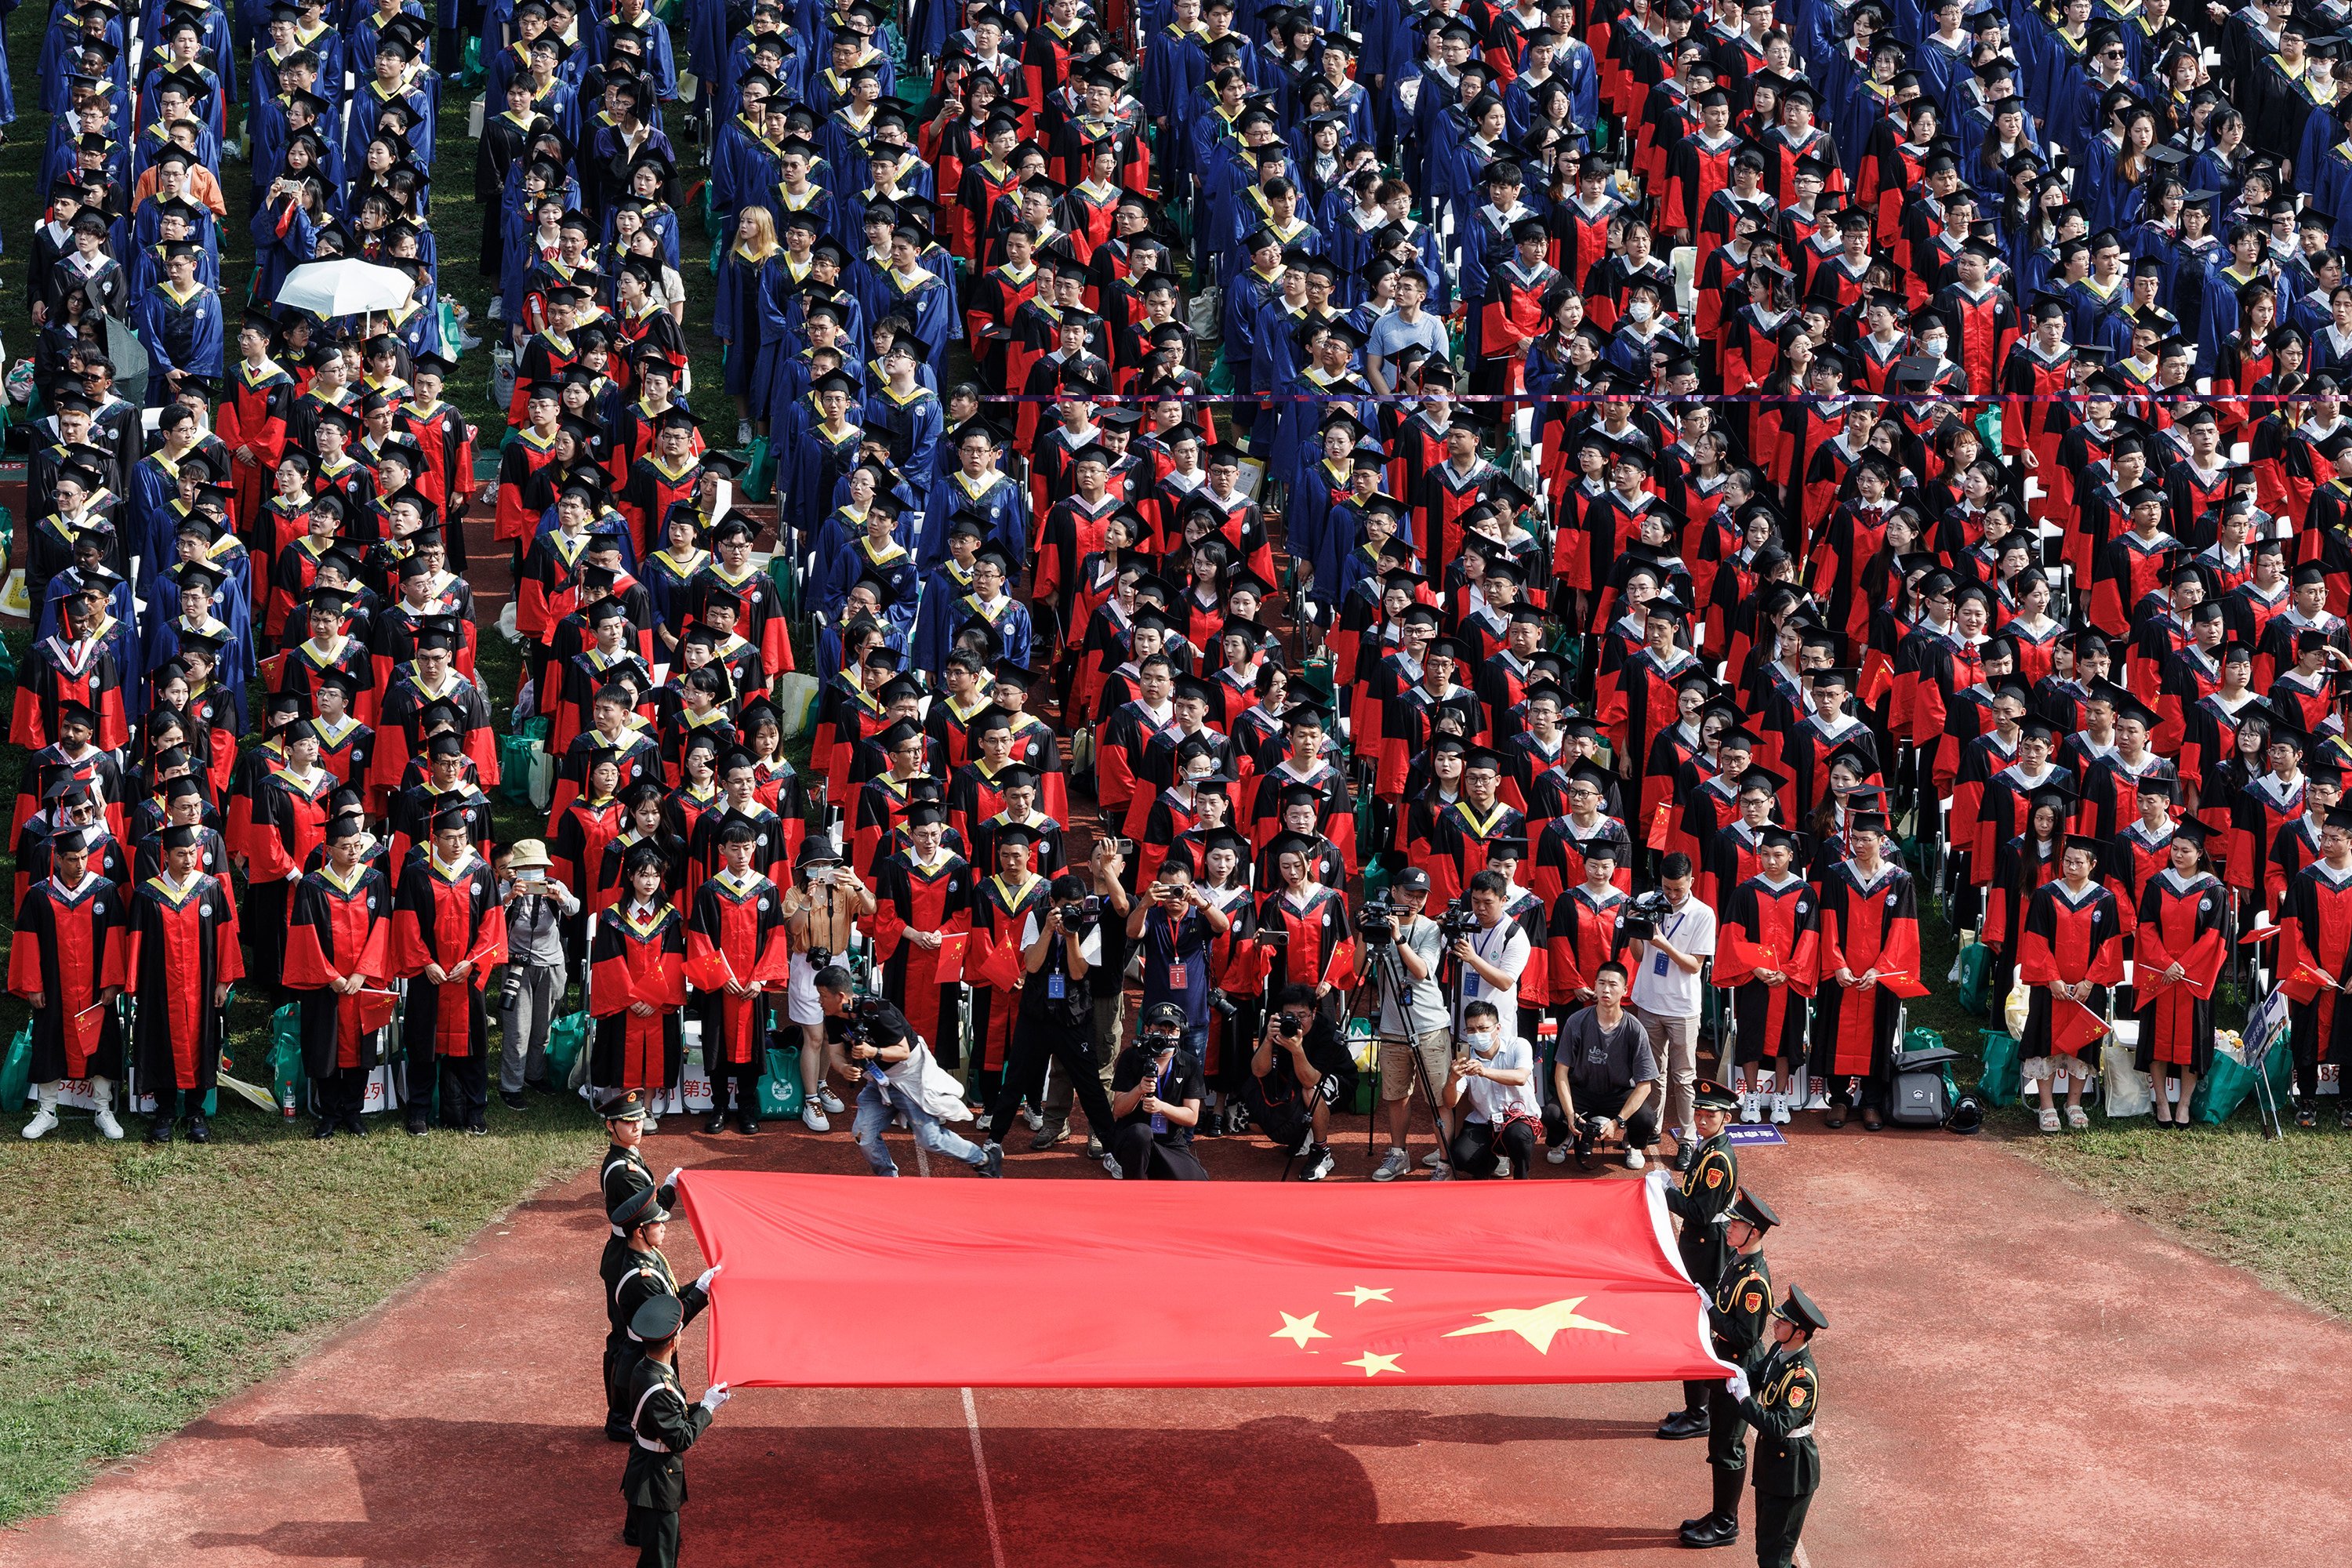 Despite recent lay-offs and pay cuts, salaries in the finance industry remain among the highest in China, with the sector continuing to be one of the most coveted career paths for graduates. Pictured are students at their graduation ceremony at Wuhan University. File photo: dpa